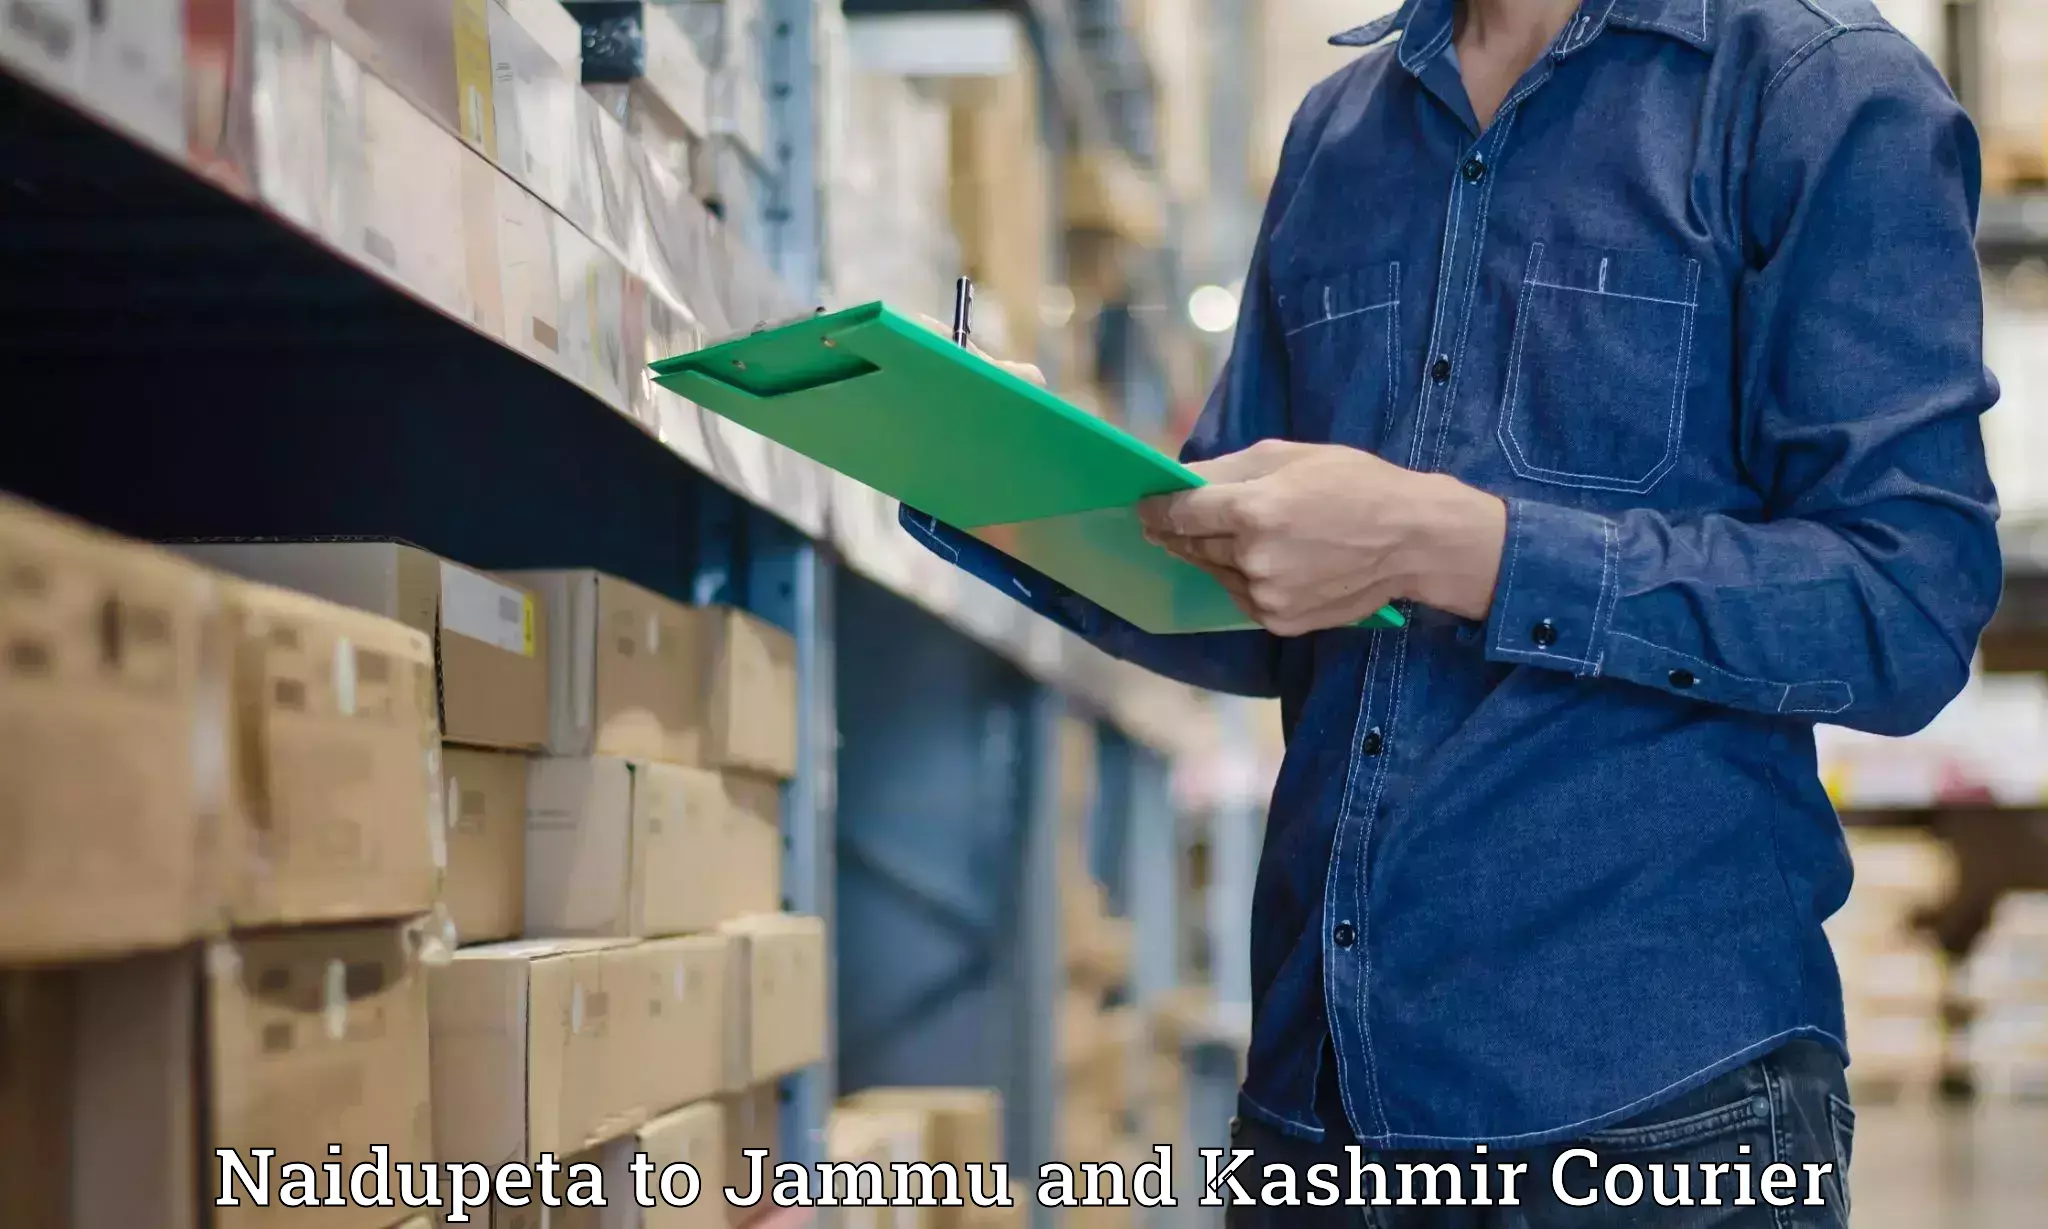 Cargo delivery service Naidupeta to Jammu and Kashmir